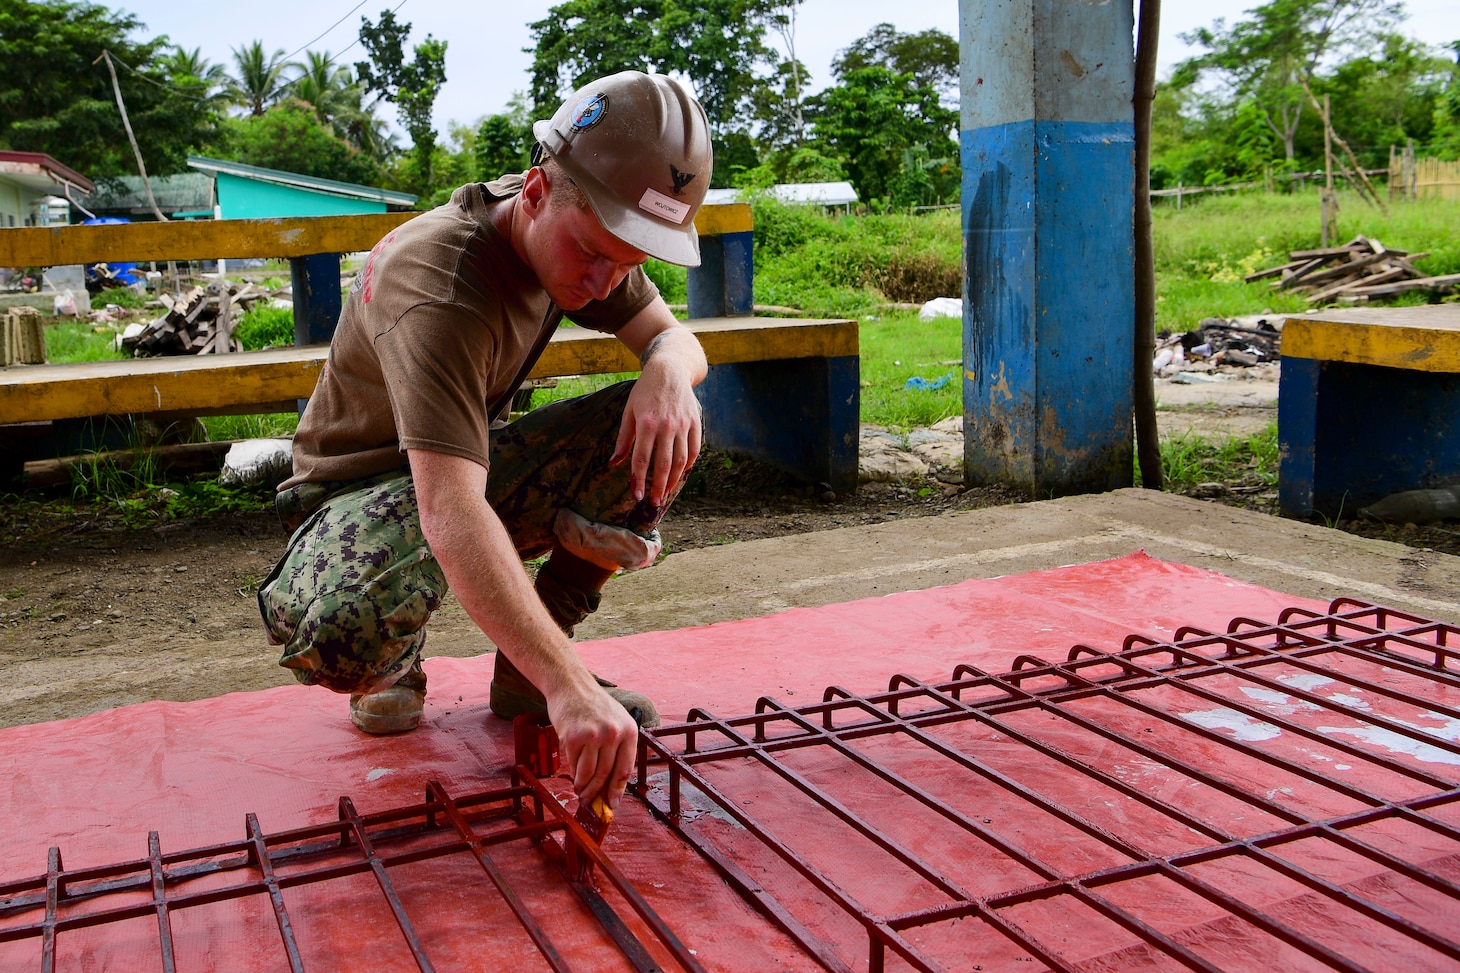 Construction Electrician 3rd Class Aaron Clifford, assigned to Amphibious Construction Battalion One (ACB 1), paints during a renovation project at Salvacion Barangay in support of Pacific Partnership 2022. Now in its 17th year, Pacific Partnership is the largest annual multinational humanitarian assistance and disaster relief preparedness mission conducted in the Indo-Pacific